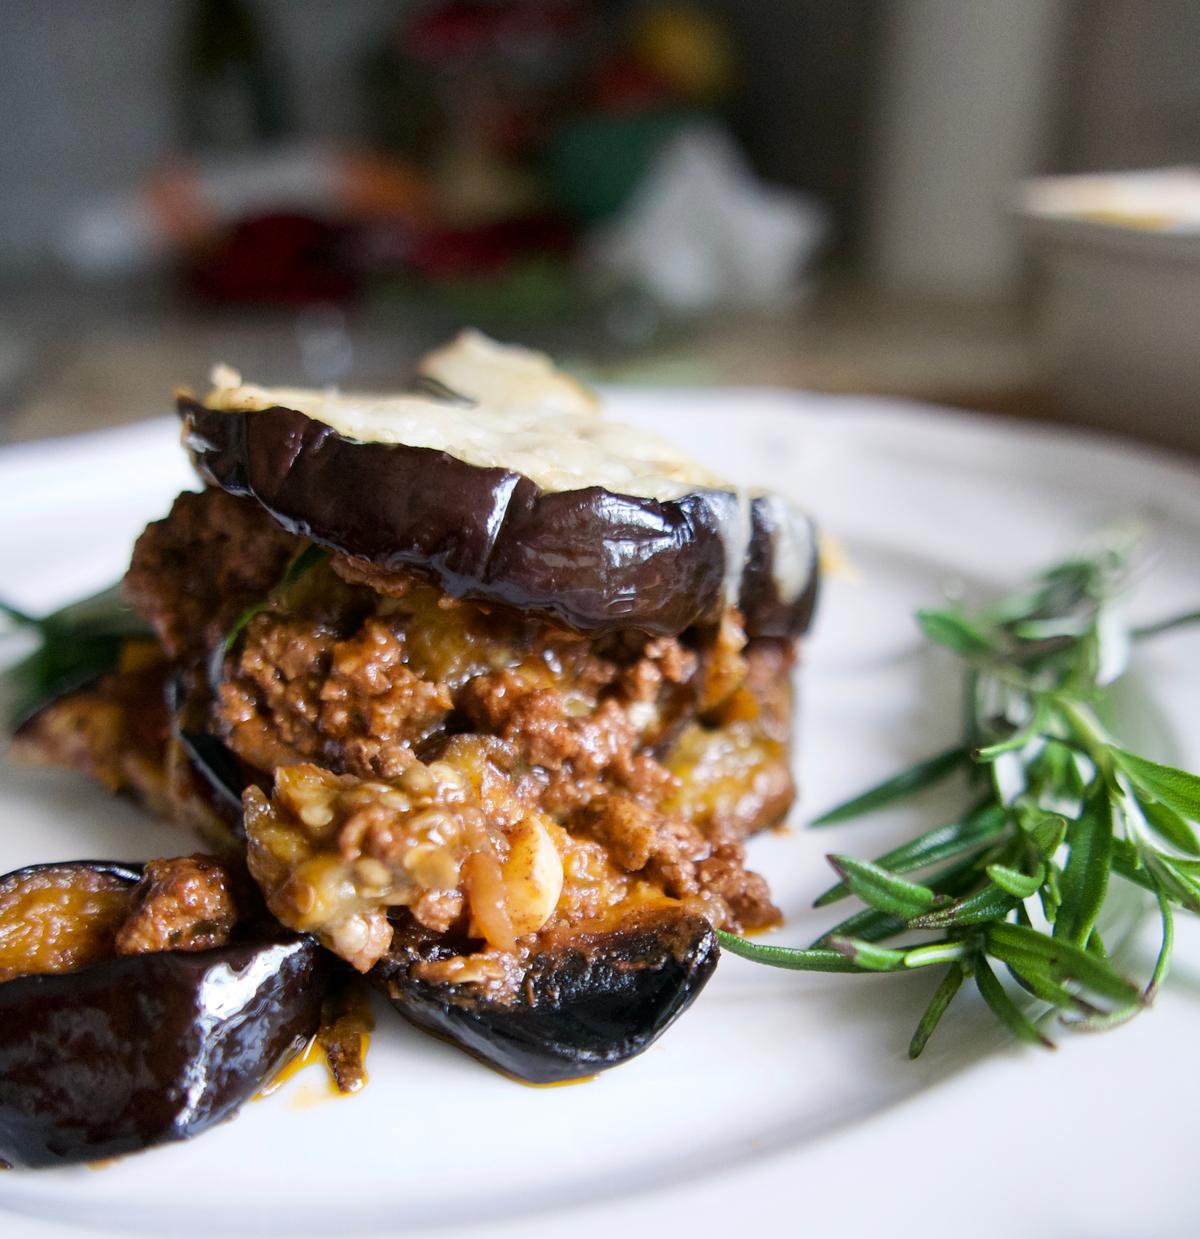 Layers of baked eggplant sandwich a rich, fragrant lamb sauce in this lighter take on a Greek classic. (Victoria de la Maza)